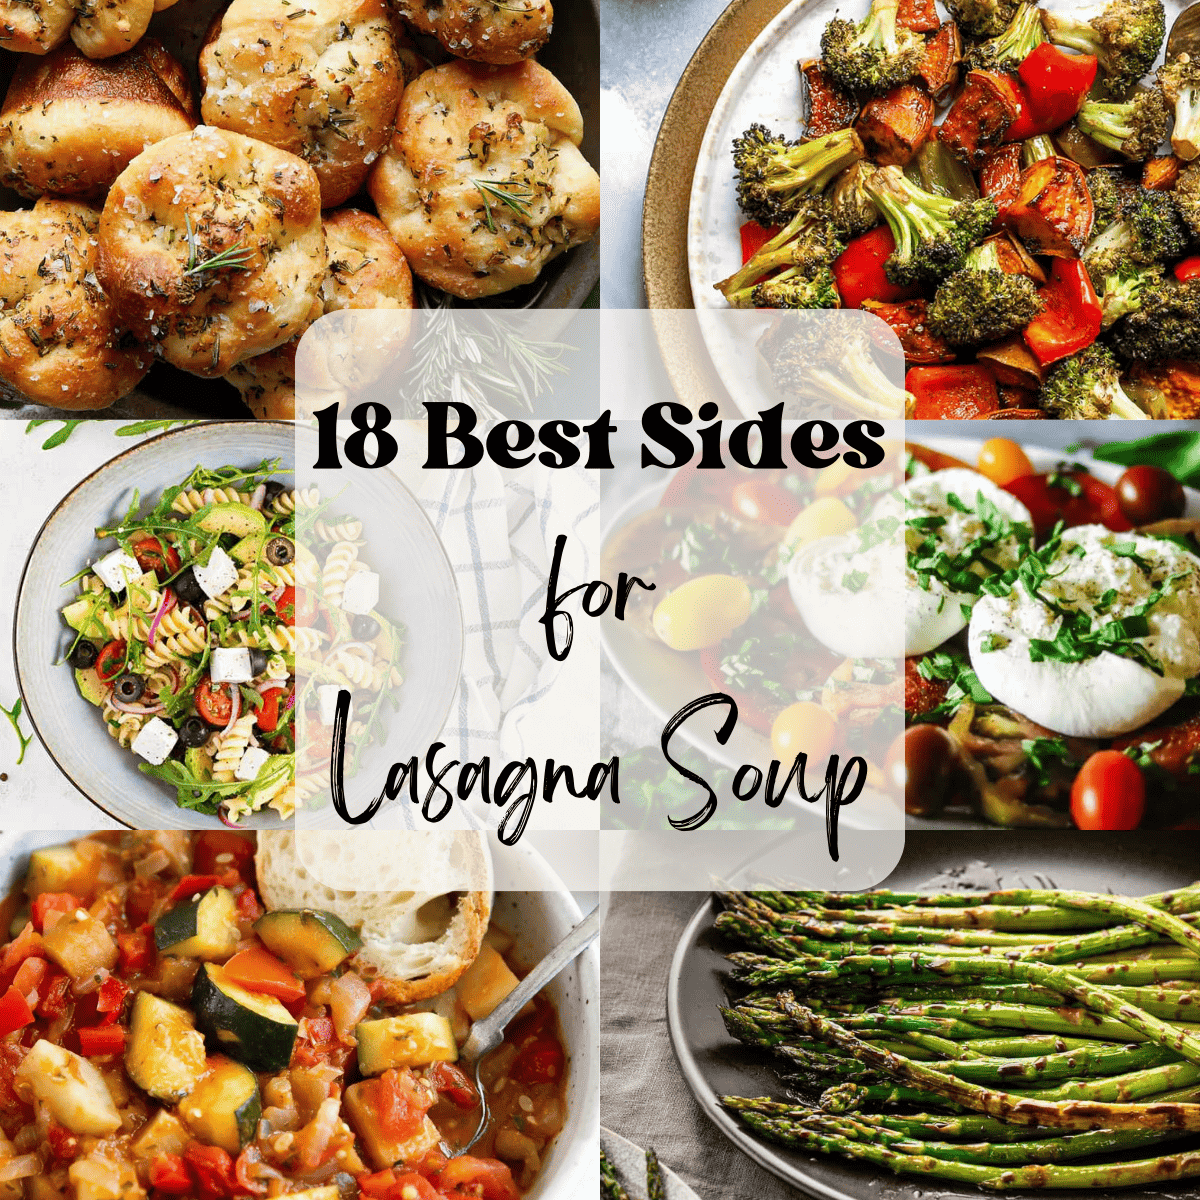 A 6 photo collage showing side dishes for lasagna soup with text overlay. 